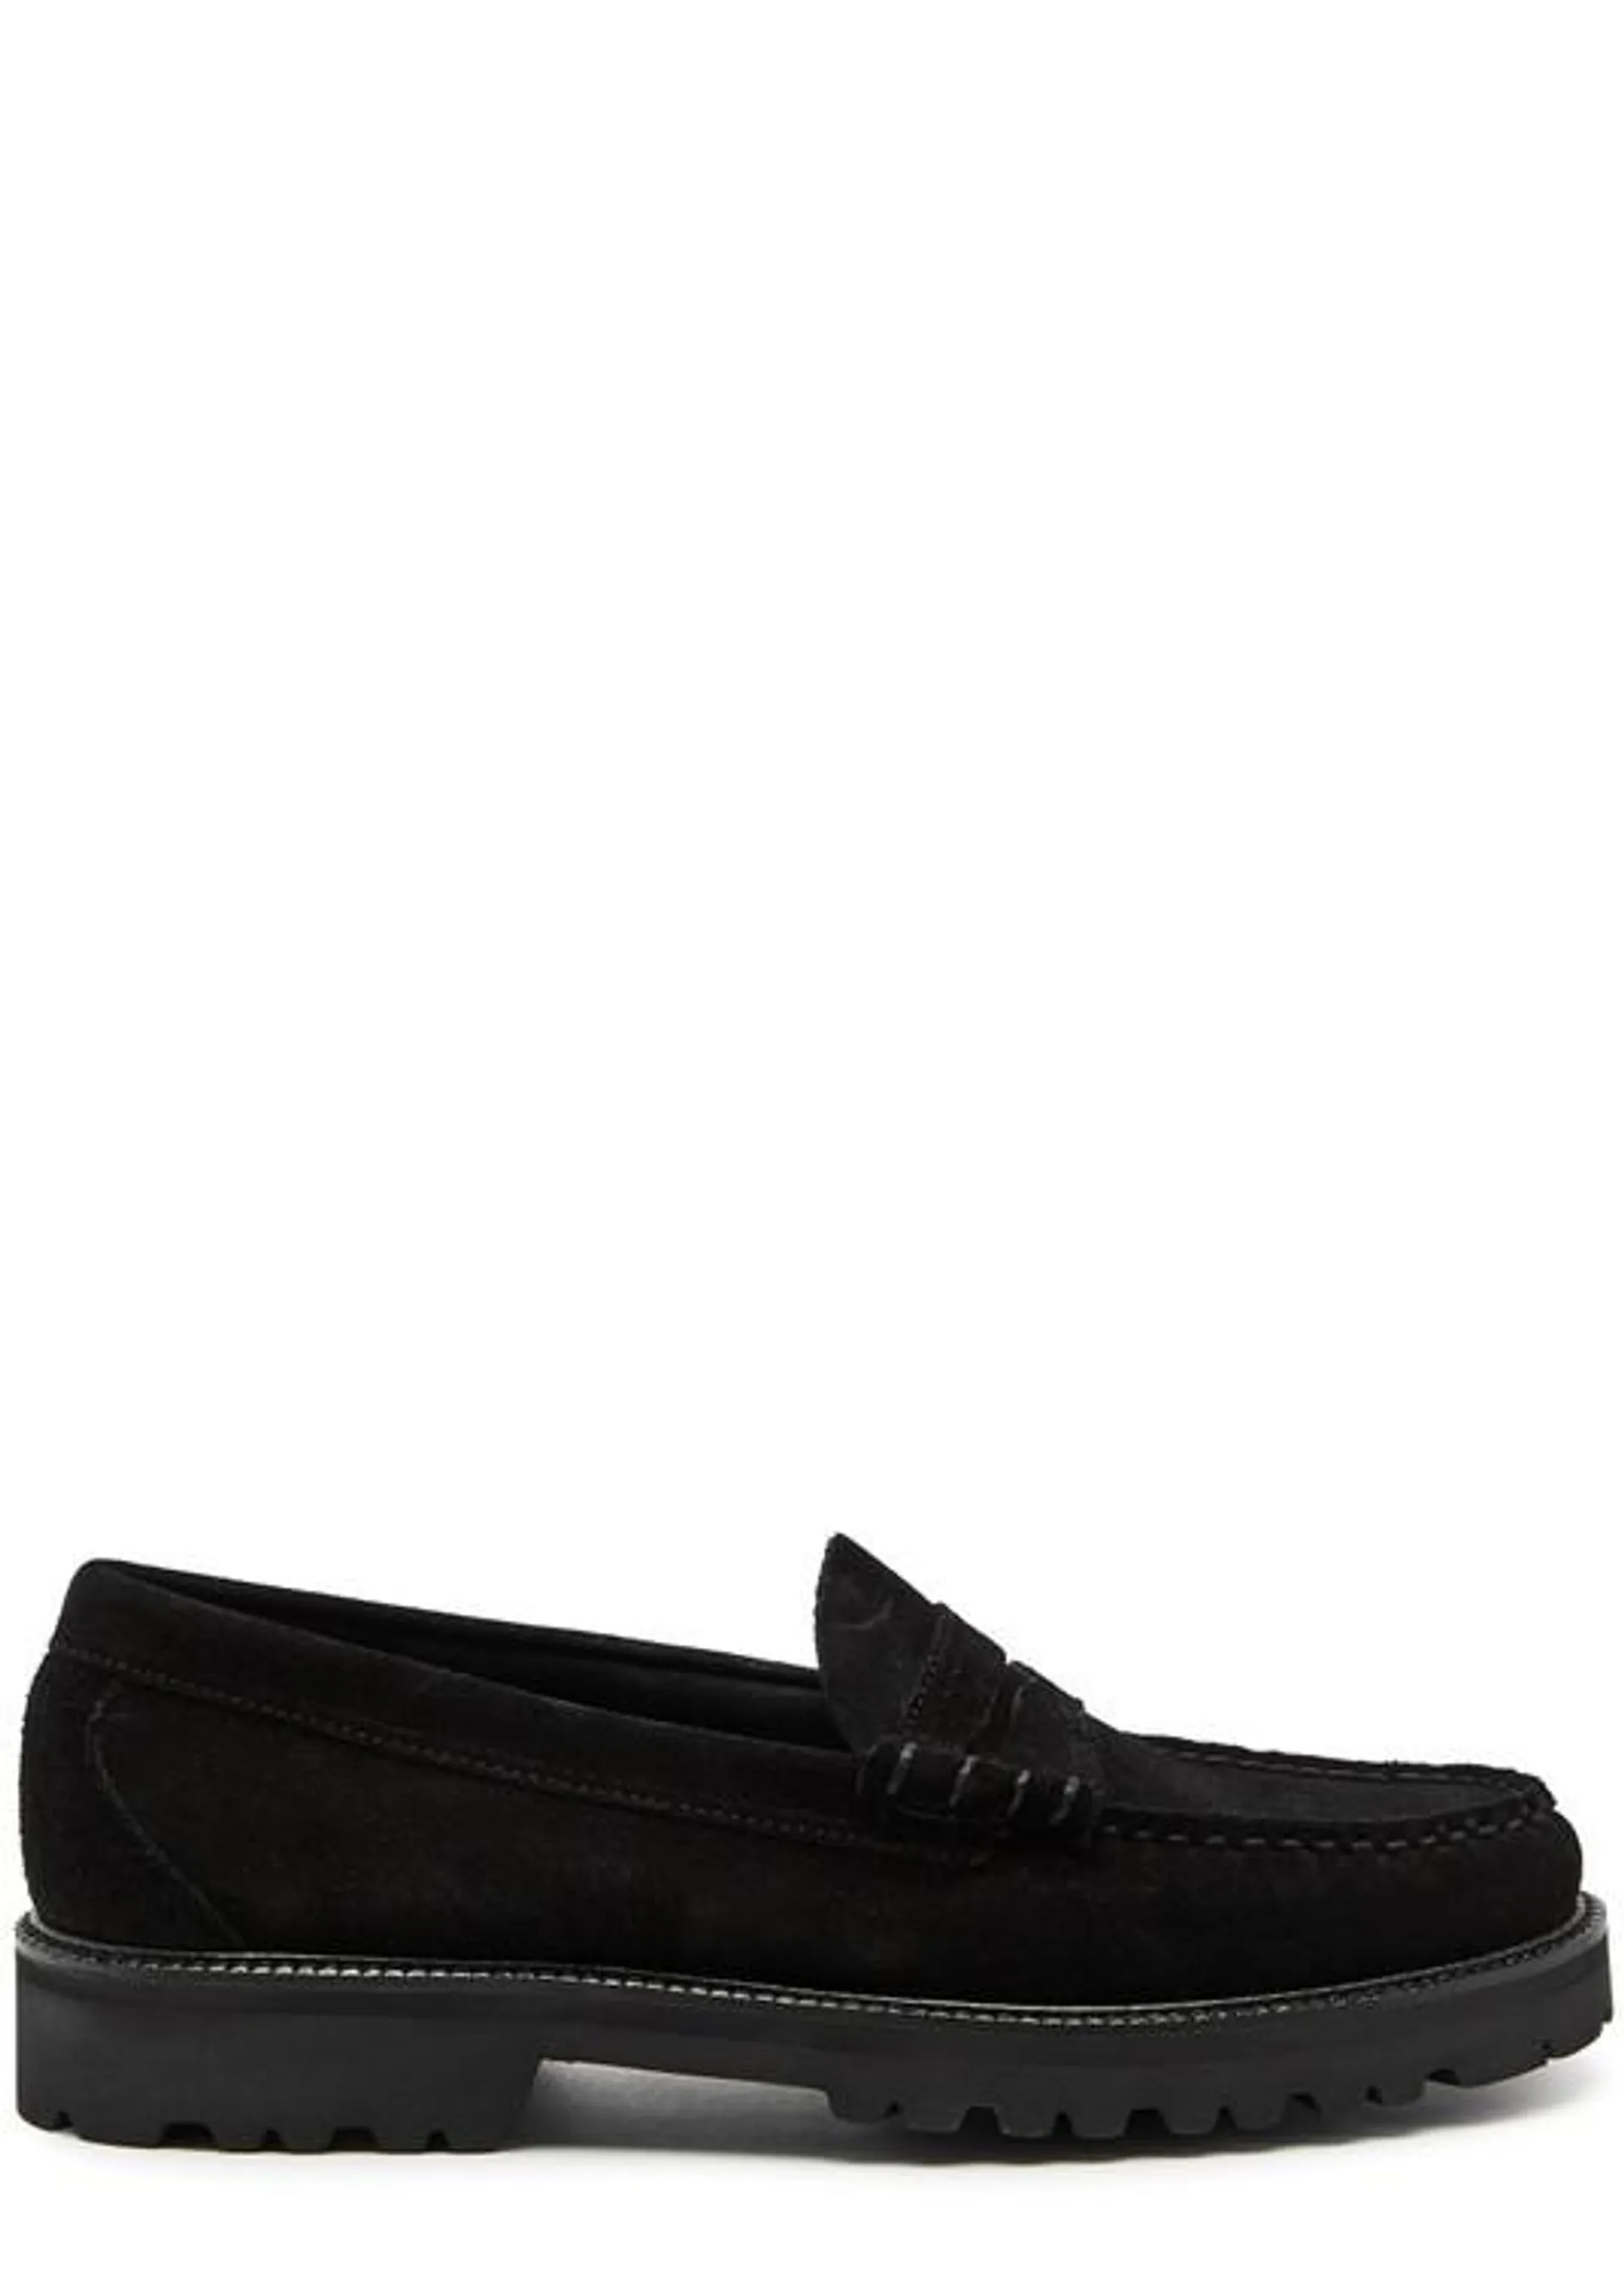 Weejuns 90s suede loafers